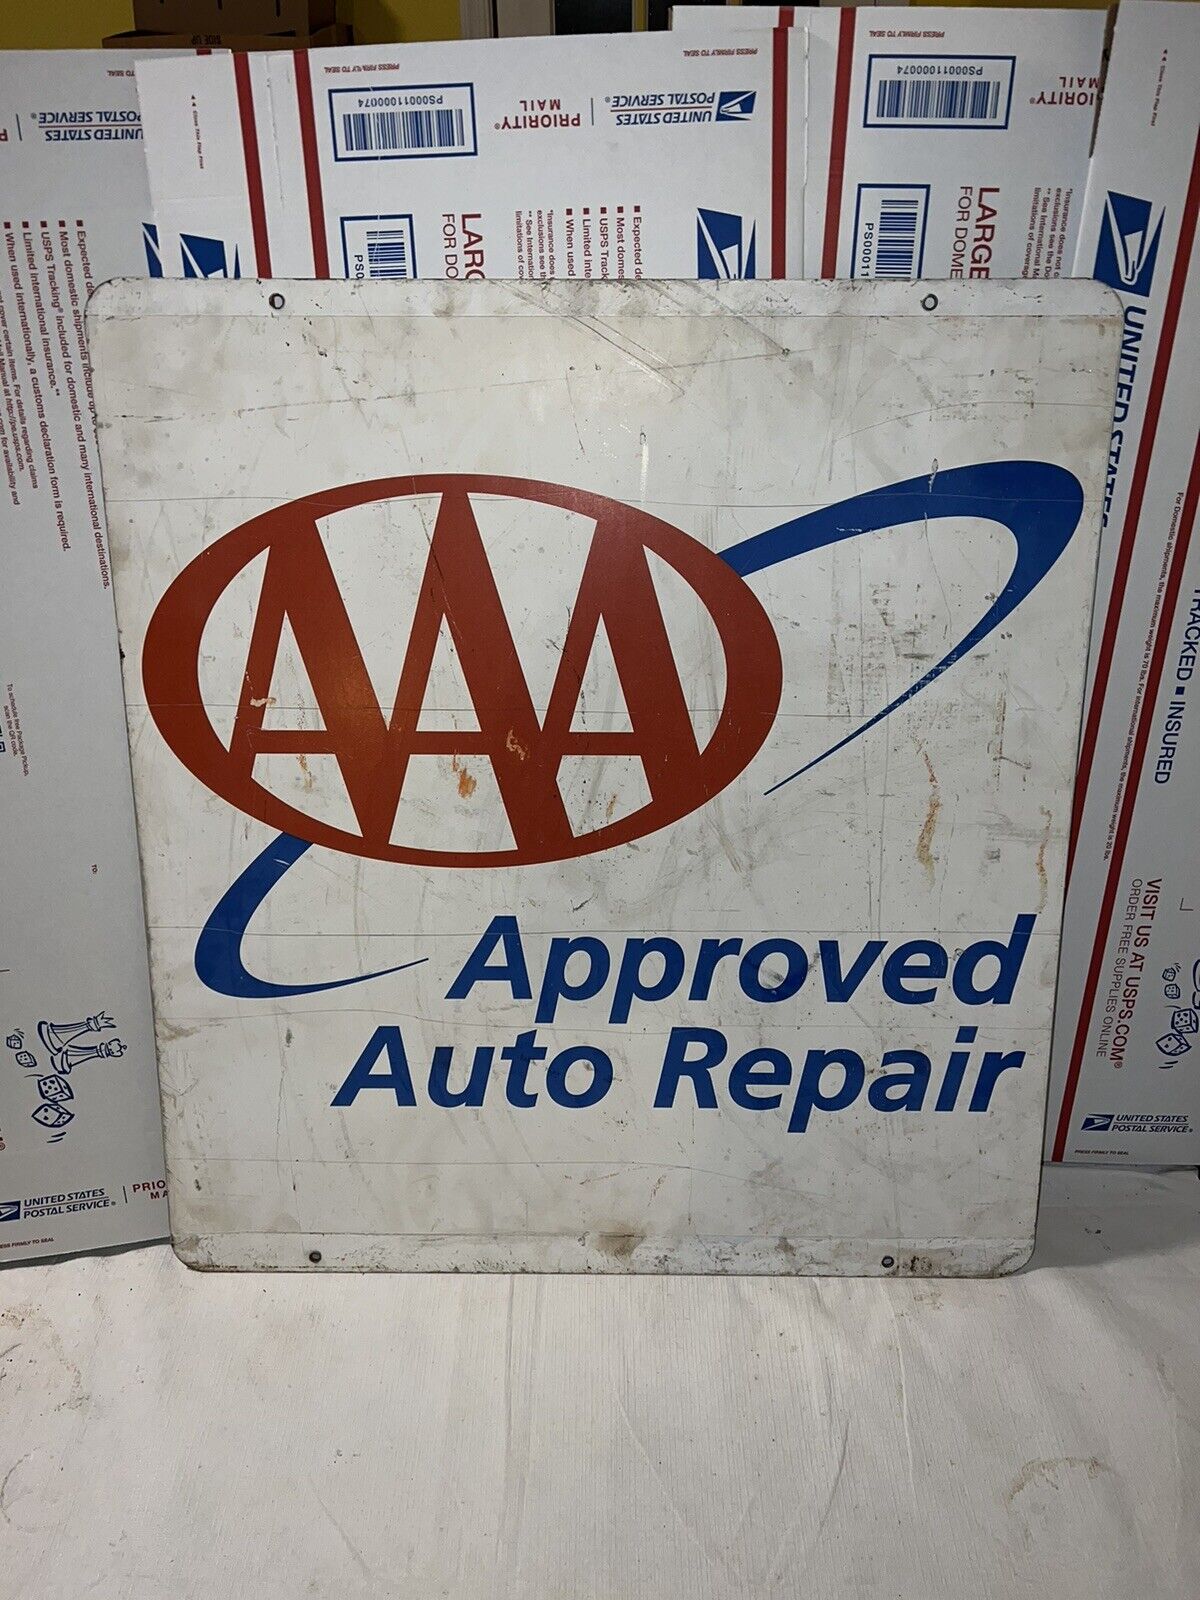 VINTAGE AAA  APPROVED AUTO REPAIR DOUBLE SIDED METAL ADVERTISING SIGN AMERICANA